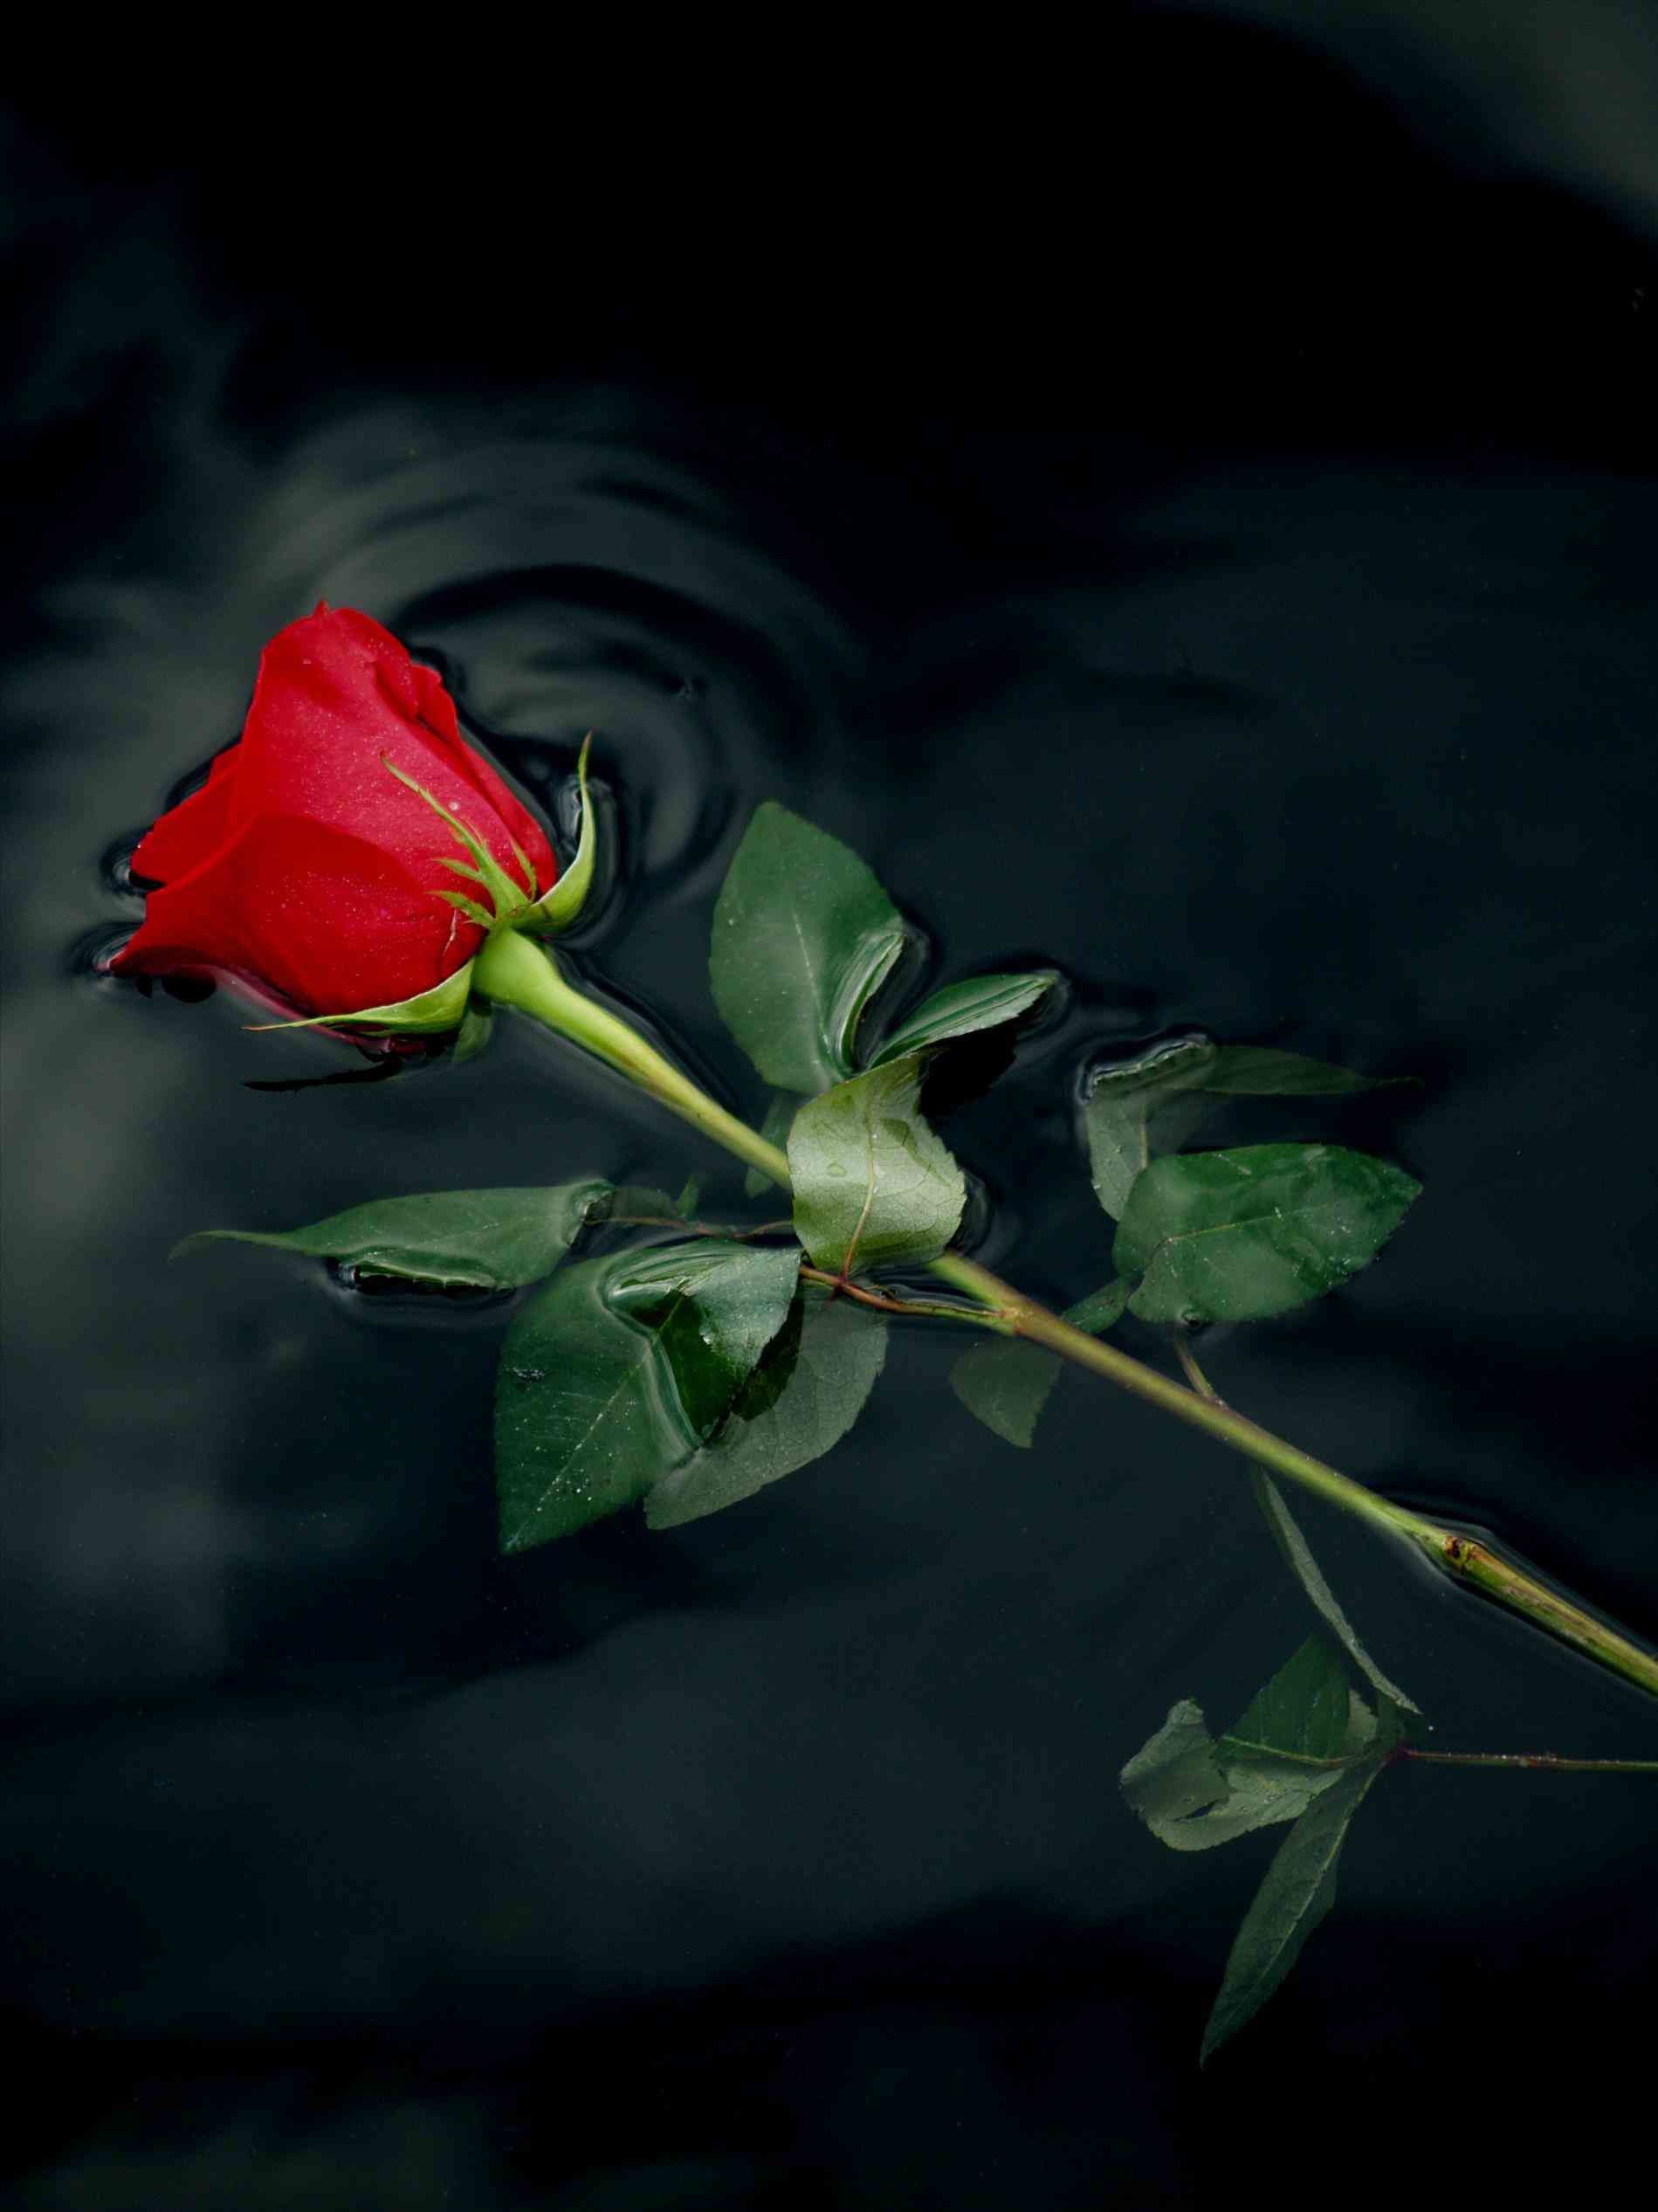 1899x2533 Of a wallpaper hd images pictures of single red roses of a red rose  wallpaper hd .